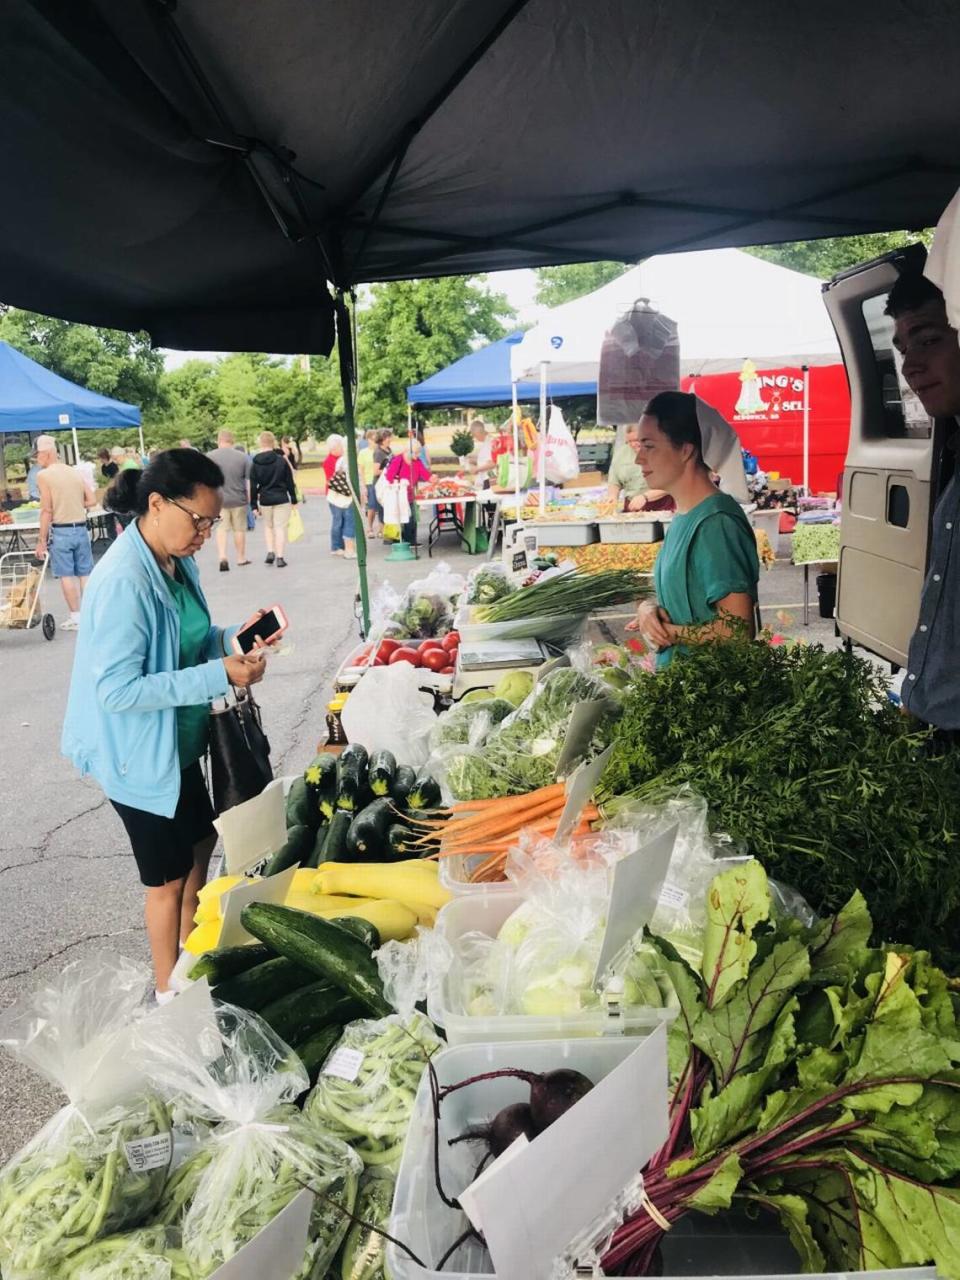 The Kansas Grown Farmers Market at the Sedgwick County Extension Center, 21st and Ridge, also opens for the season on Saturday. Courtesy/Kansas Grown Farmers Market